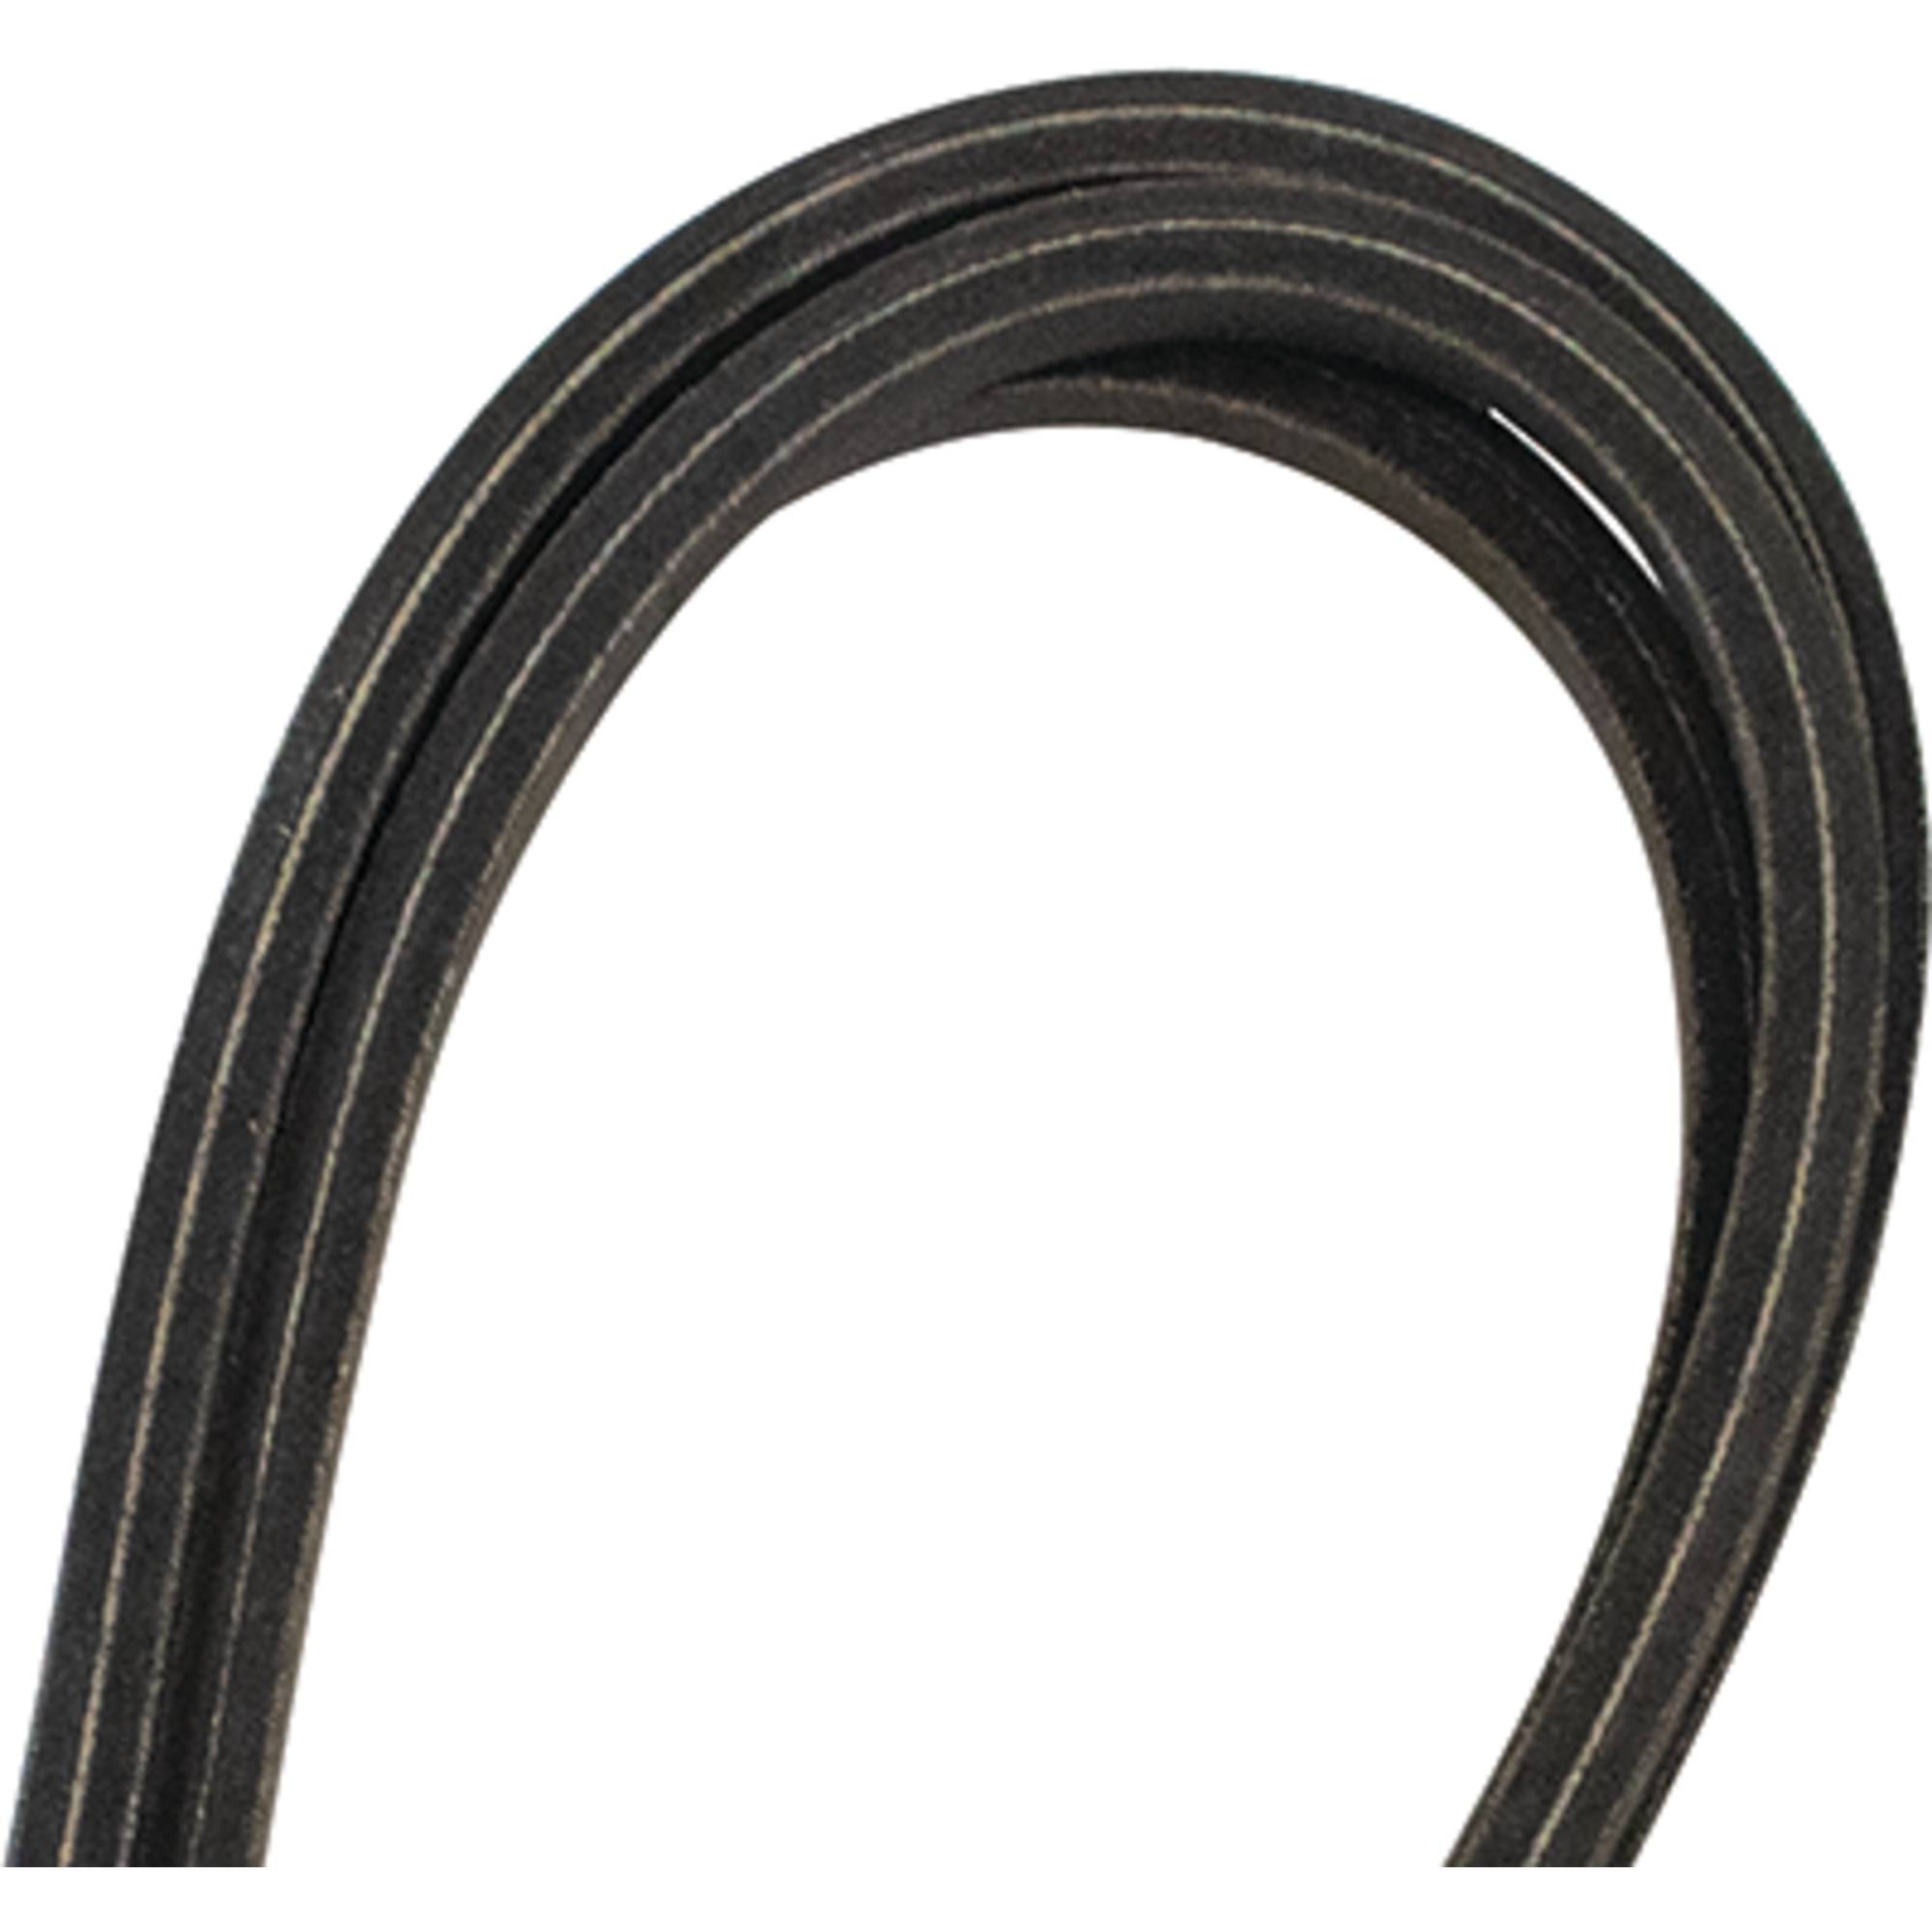 Stens Deck Belt for Riding Mower/Tractors in the Lawn Mower Belts